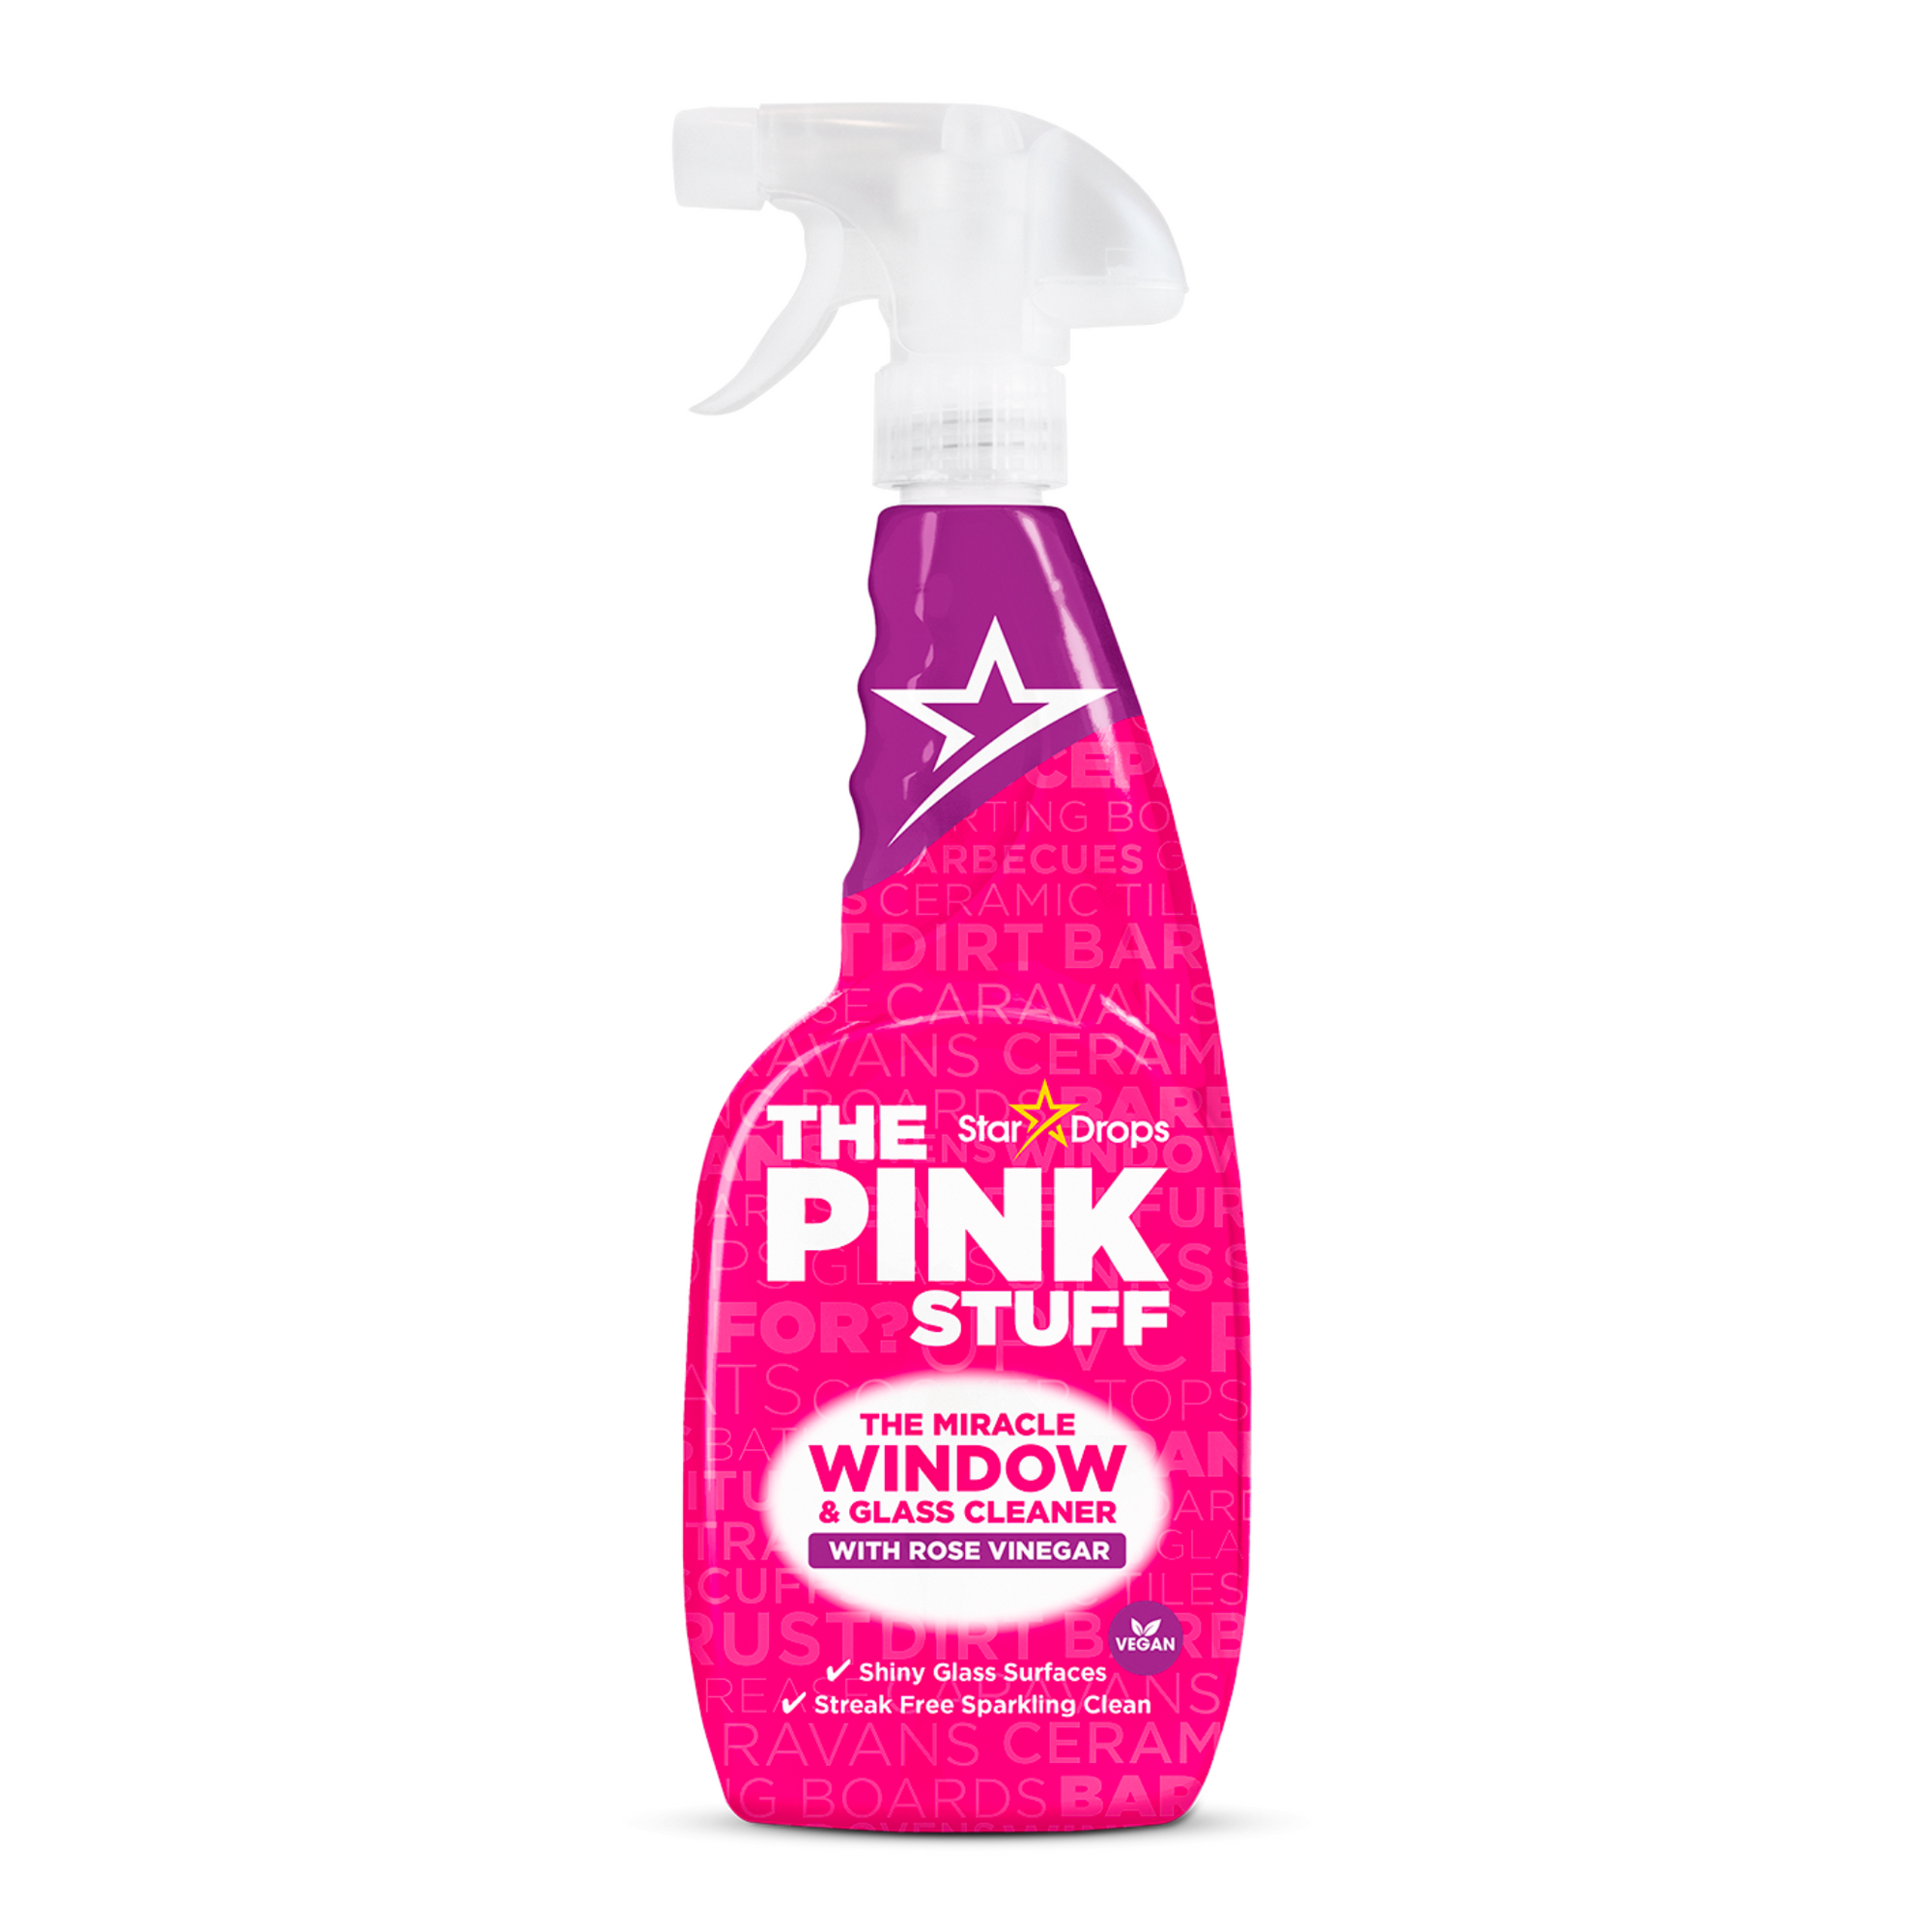 Stardrops - The Pink Stuff - The Miracle Wash Up Spray Bundle (2 Wash Up  Sprays)